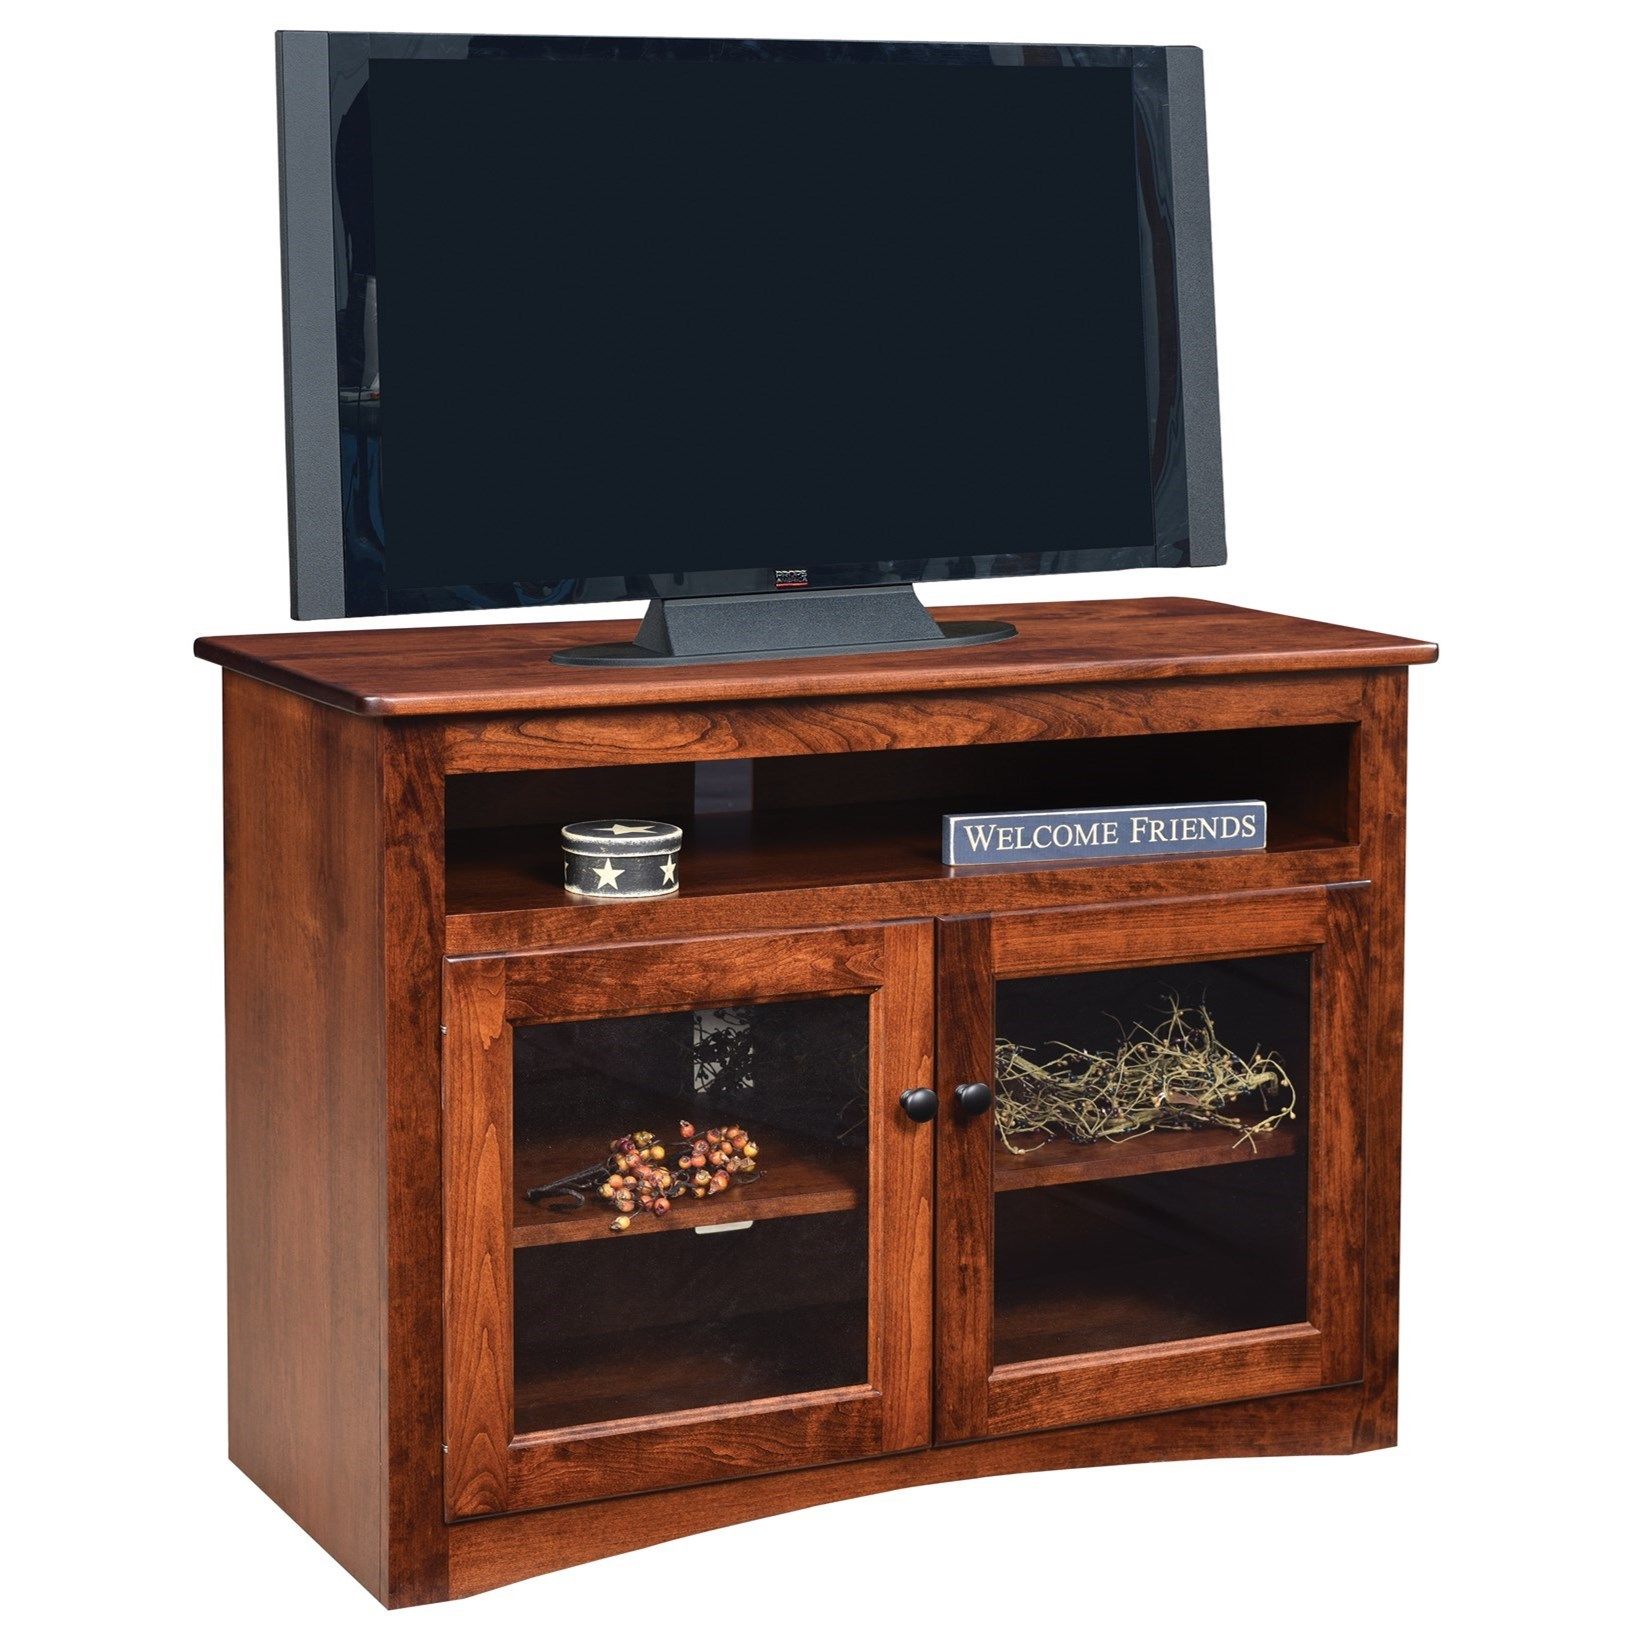 Ashery Oak Economy 40" Customizable Solid Wood Tv Stand Pertaining To Modern Tv Stands In Oak Wood And Black Accents With Storage Doors (View 3 of 15)